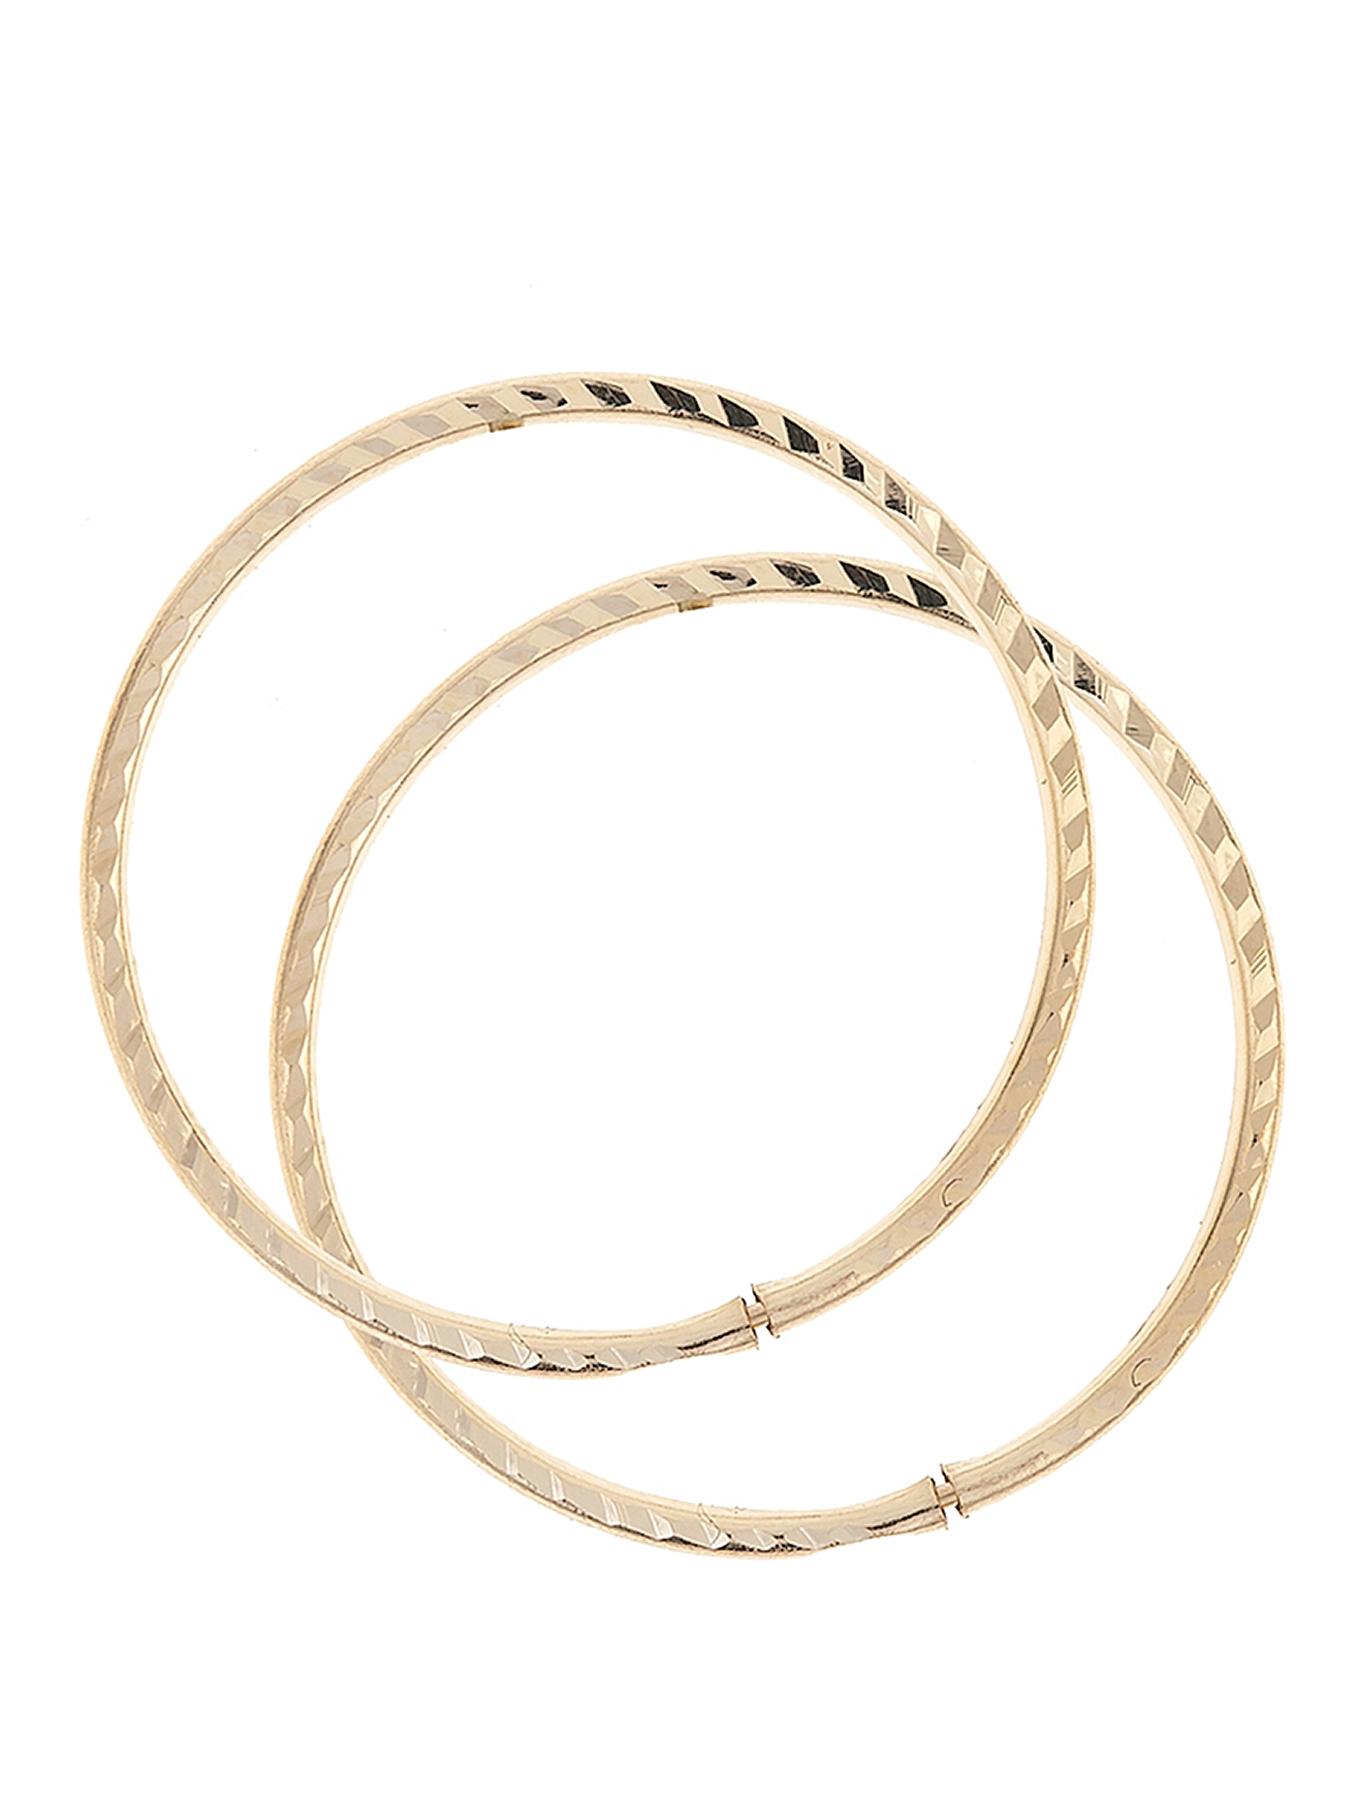  9 Carat Yellow Gold Set of Two Crimped Tube Hoops